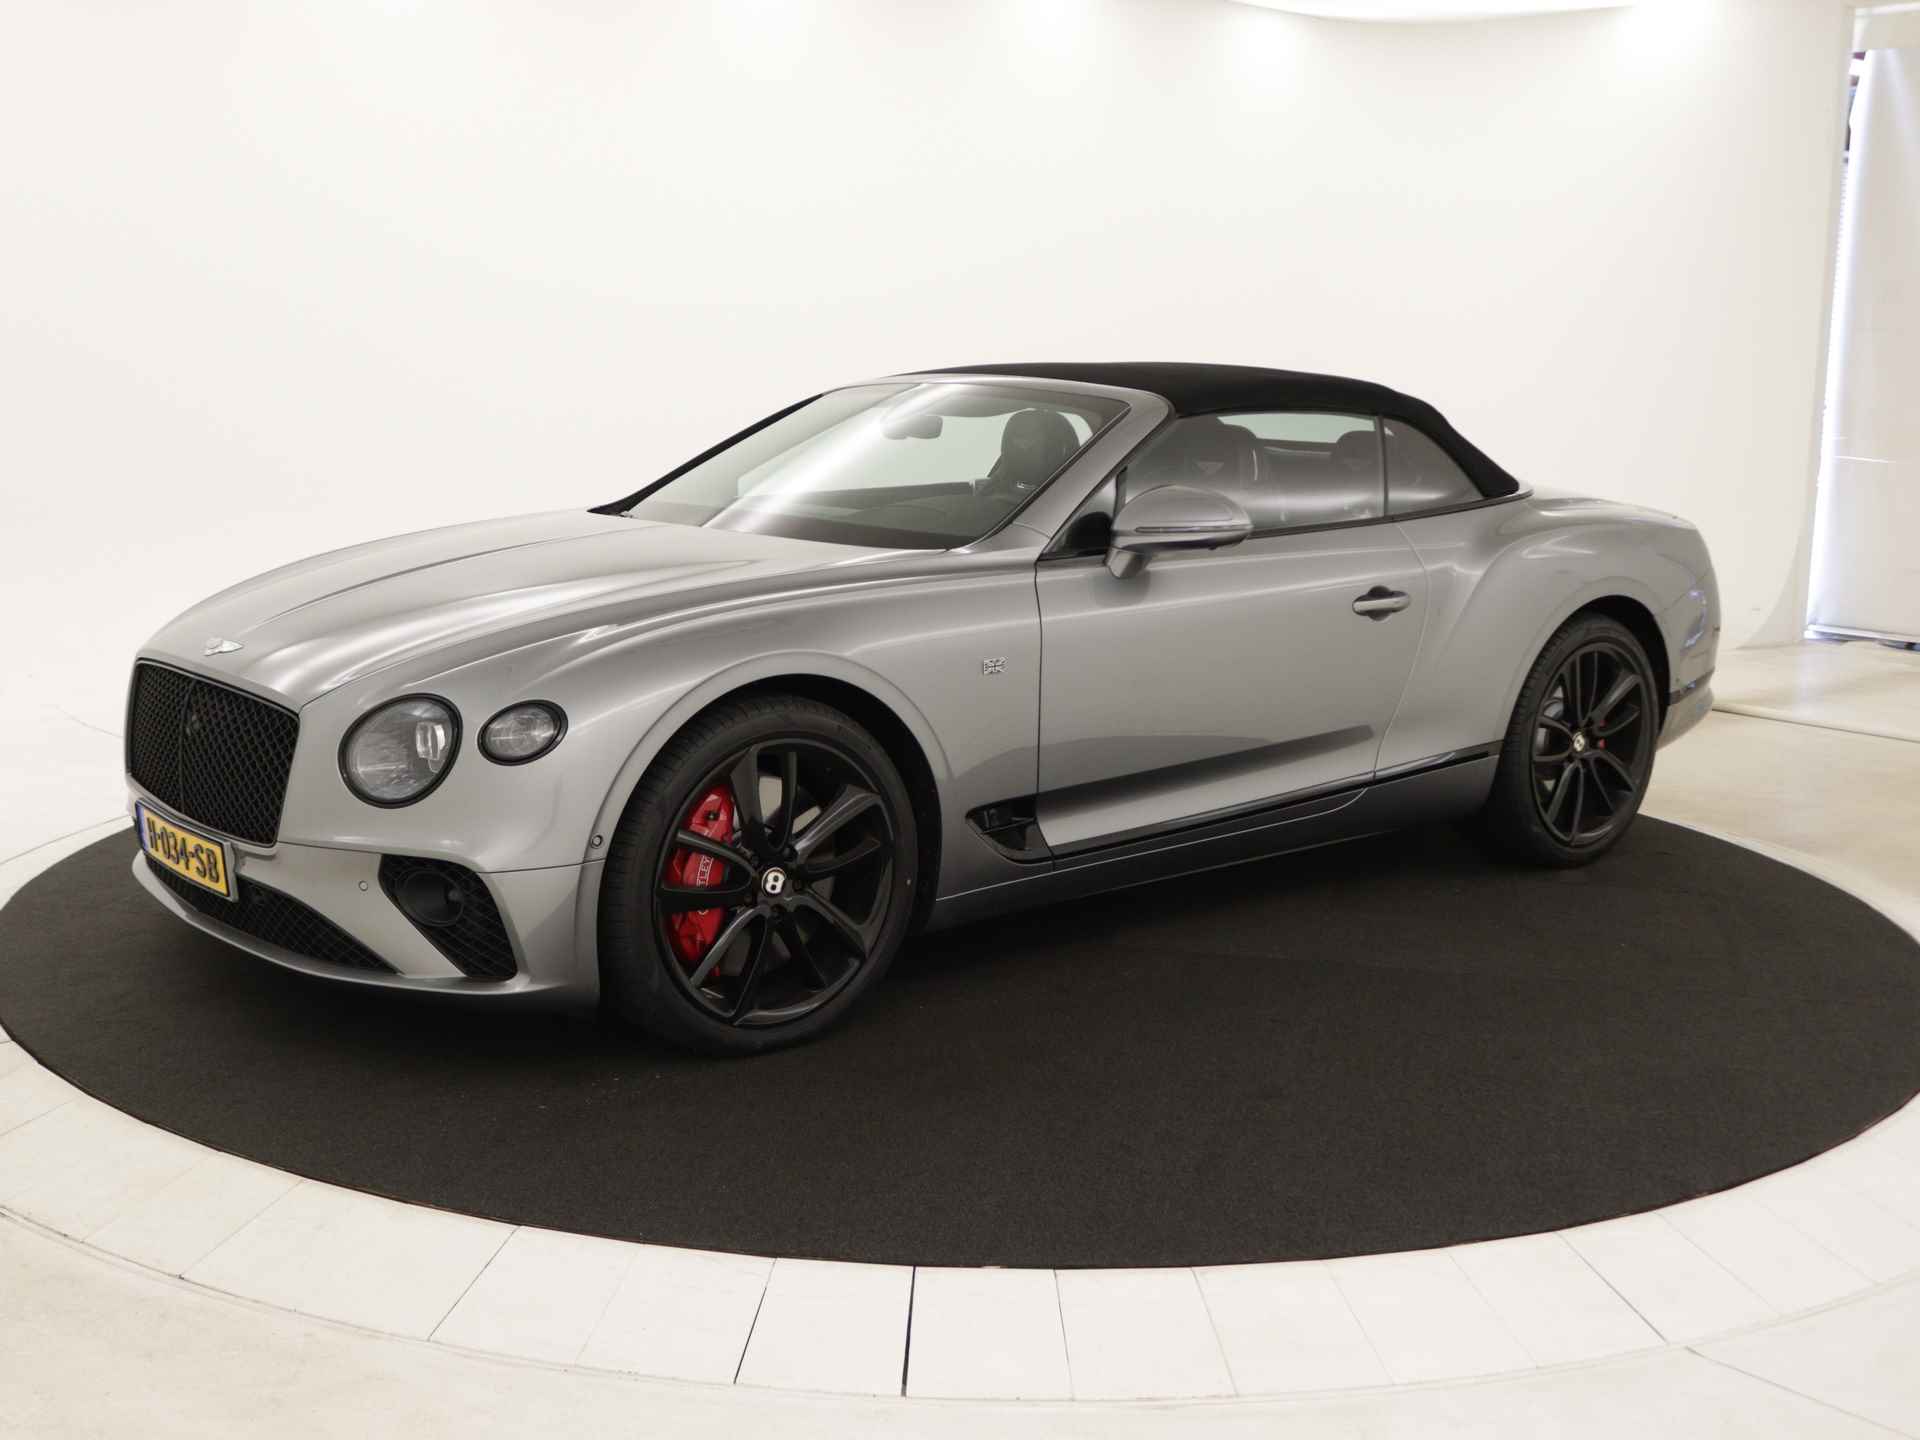 Bentley Continental GTC 6.0 W12 First Edition Mulliner - Bang & Olufsen - Black package - Massage seats - 43/46